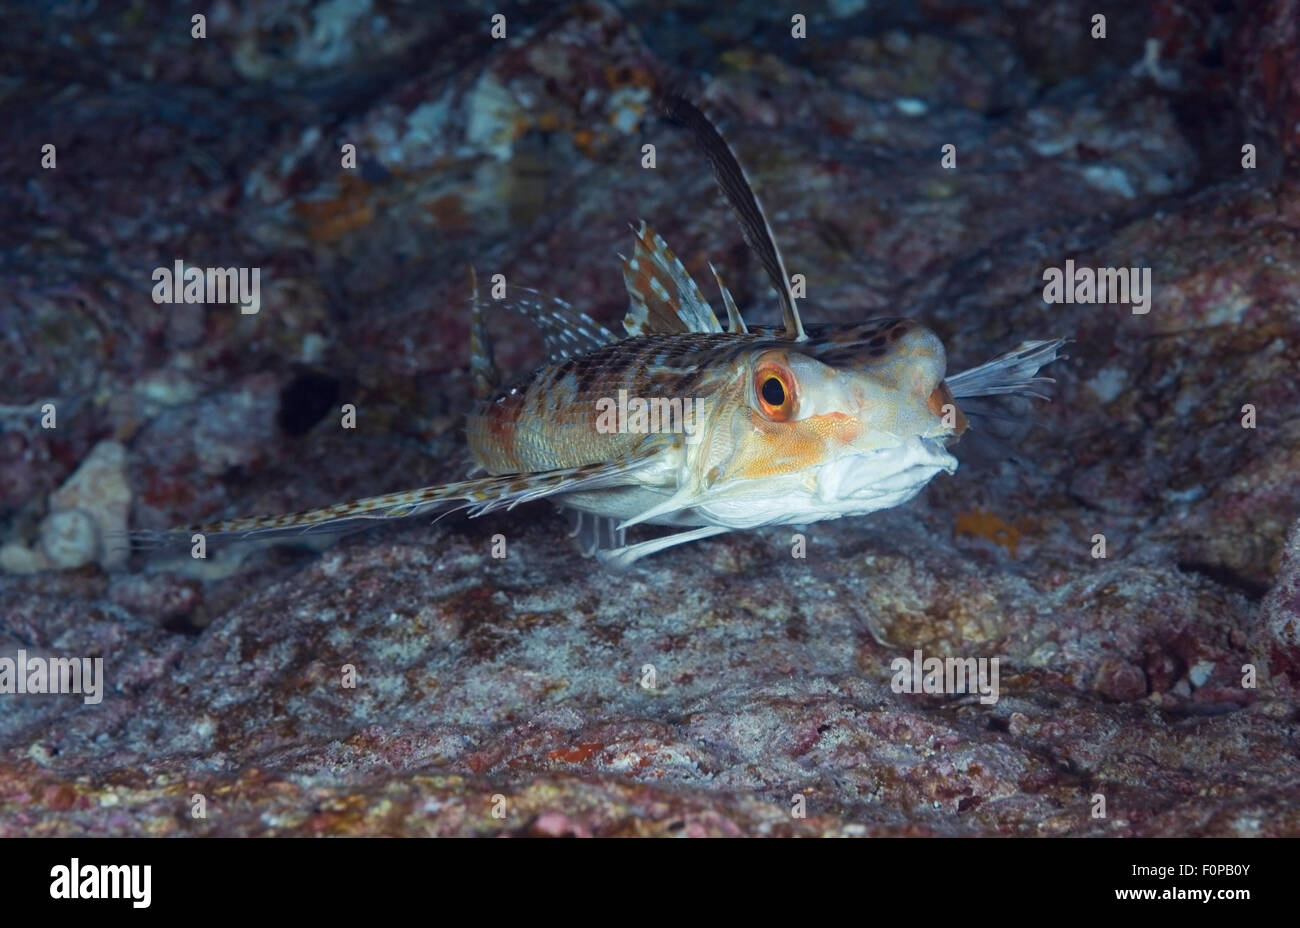 CLOSE-UP FACE VIEW OF HELMET GURNARD SWIMMING CLOSE TO CORAL REEF BOTTOM Stock Photo